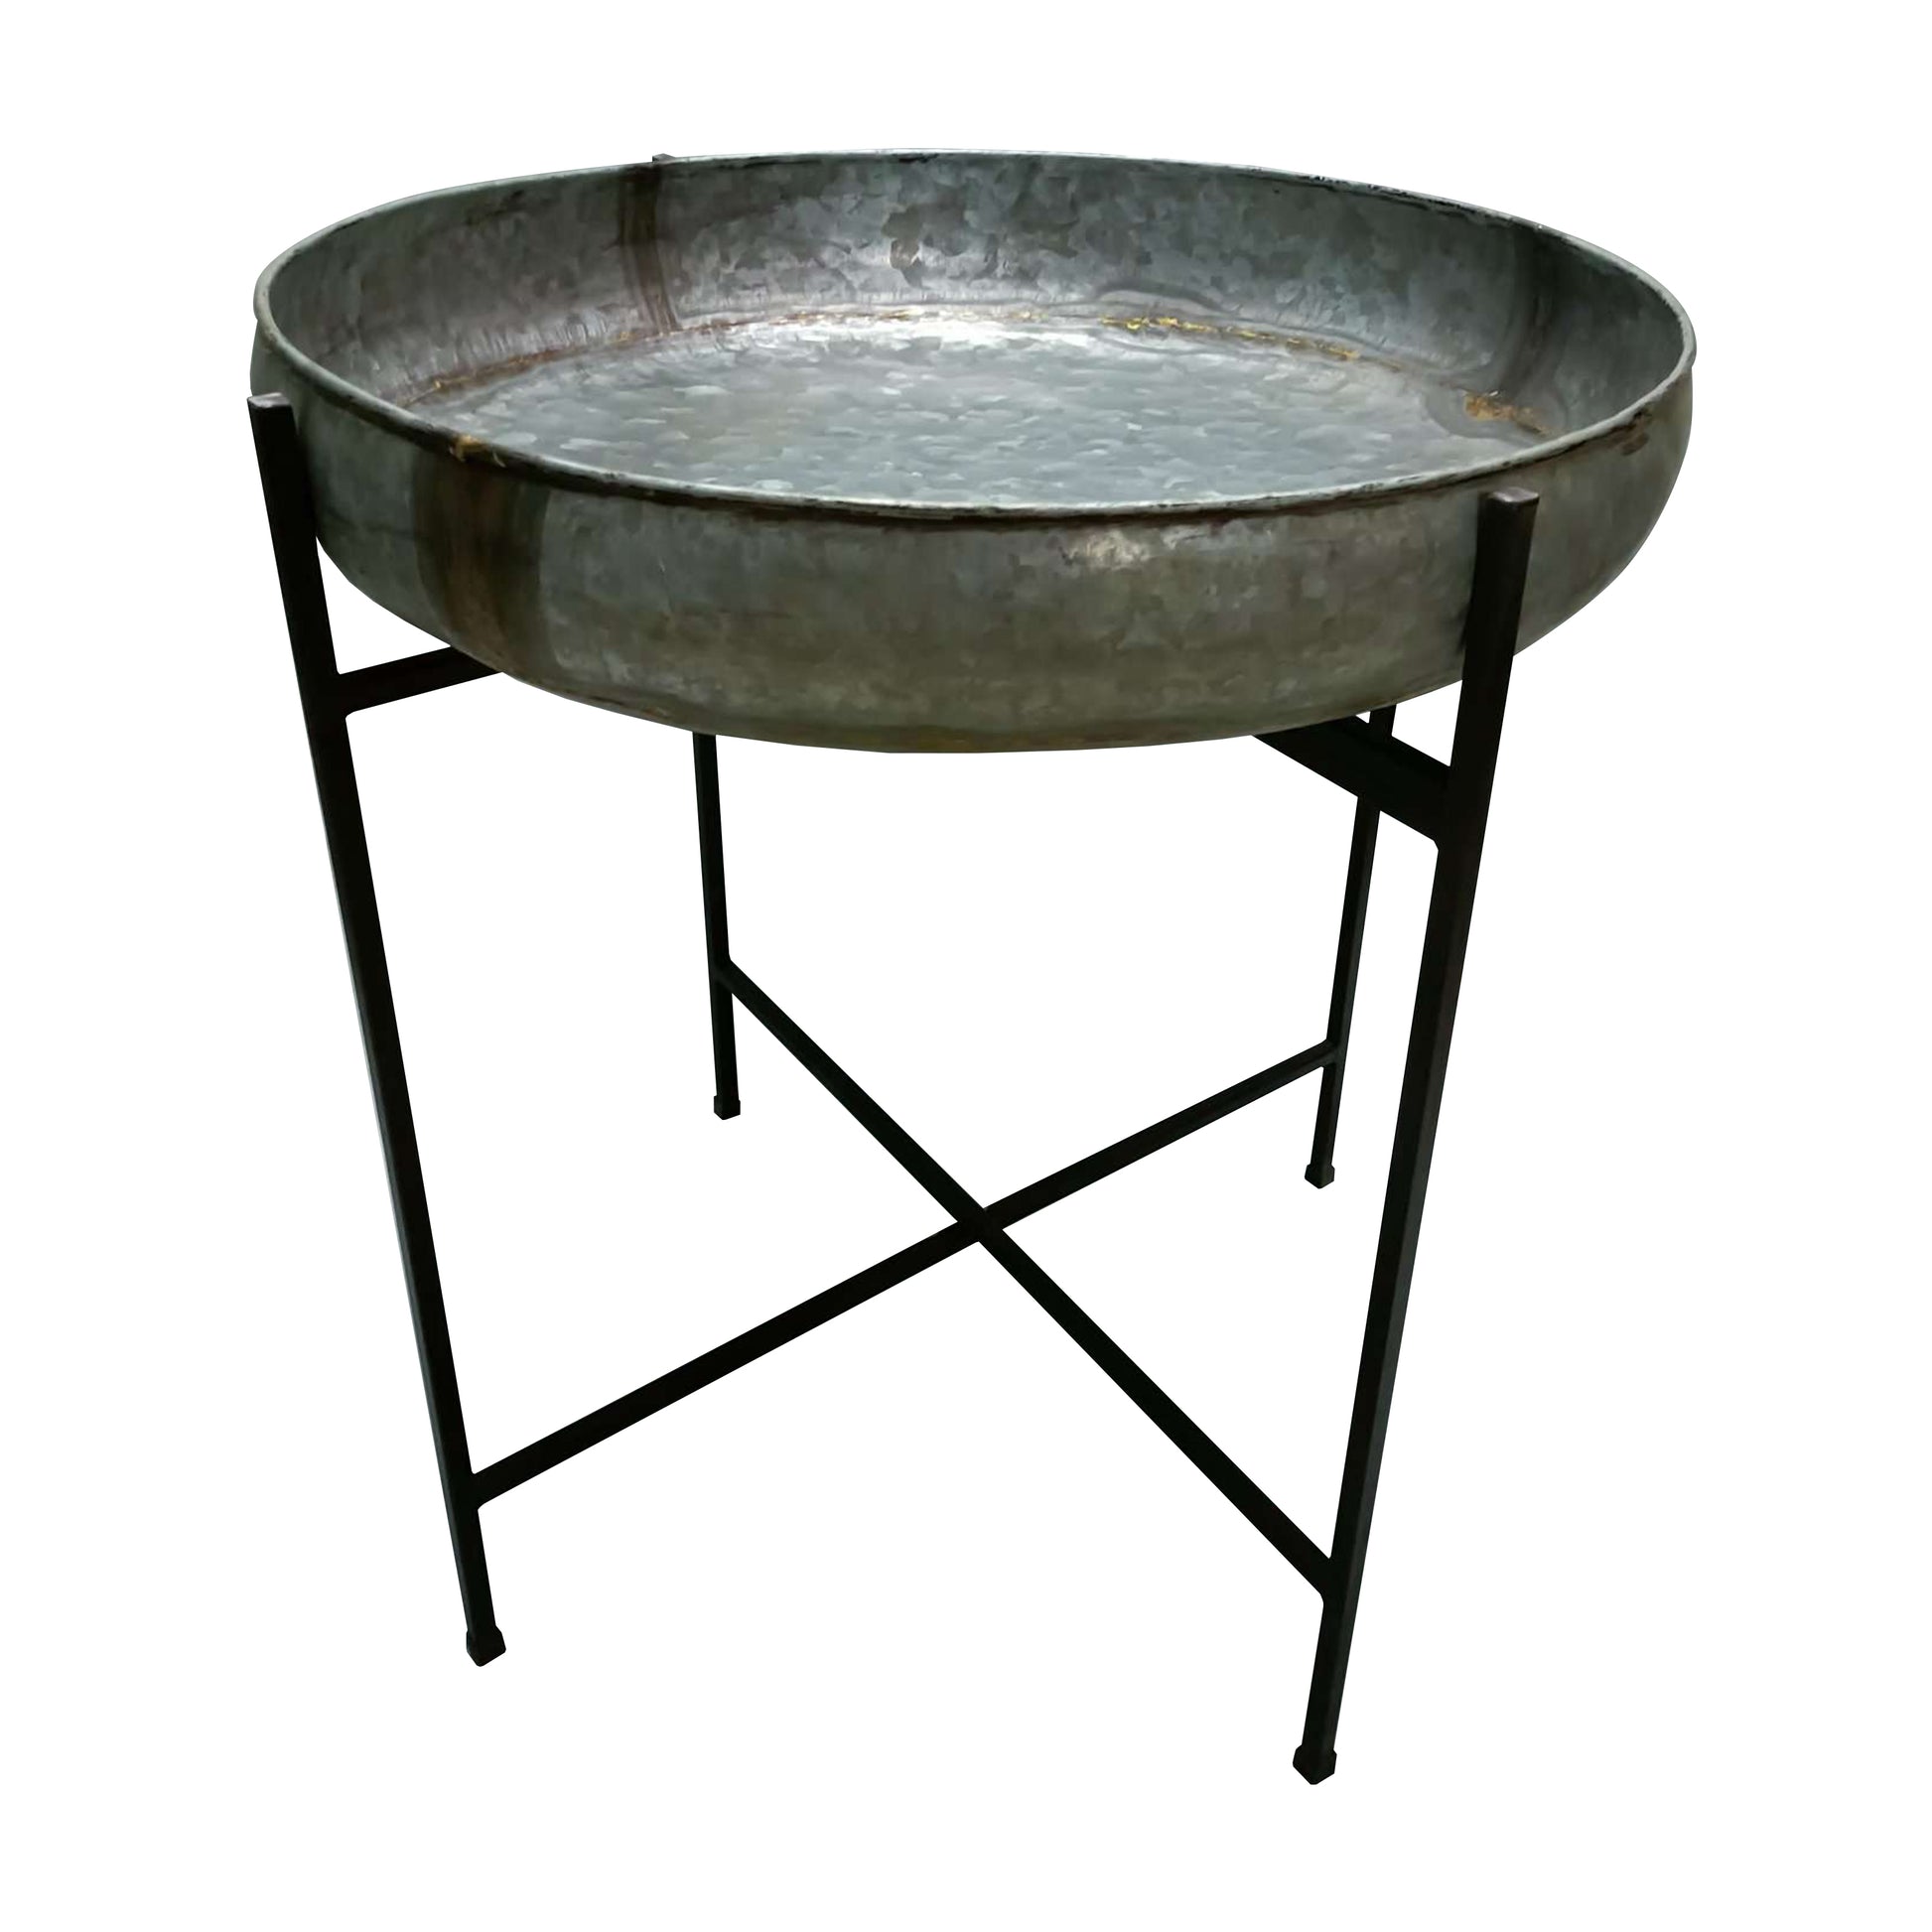 26 Inch Wide Round Tray Planter Galvanized Iron Frame X Shape Base Gray Black By The Urban Port UPT-270549